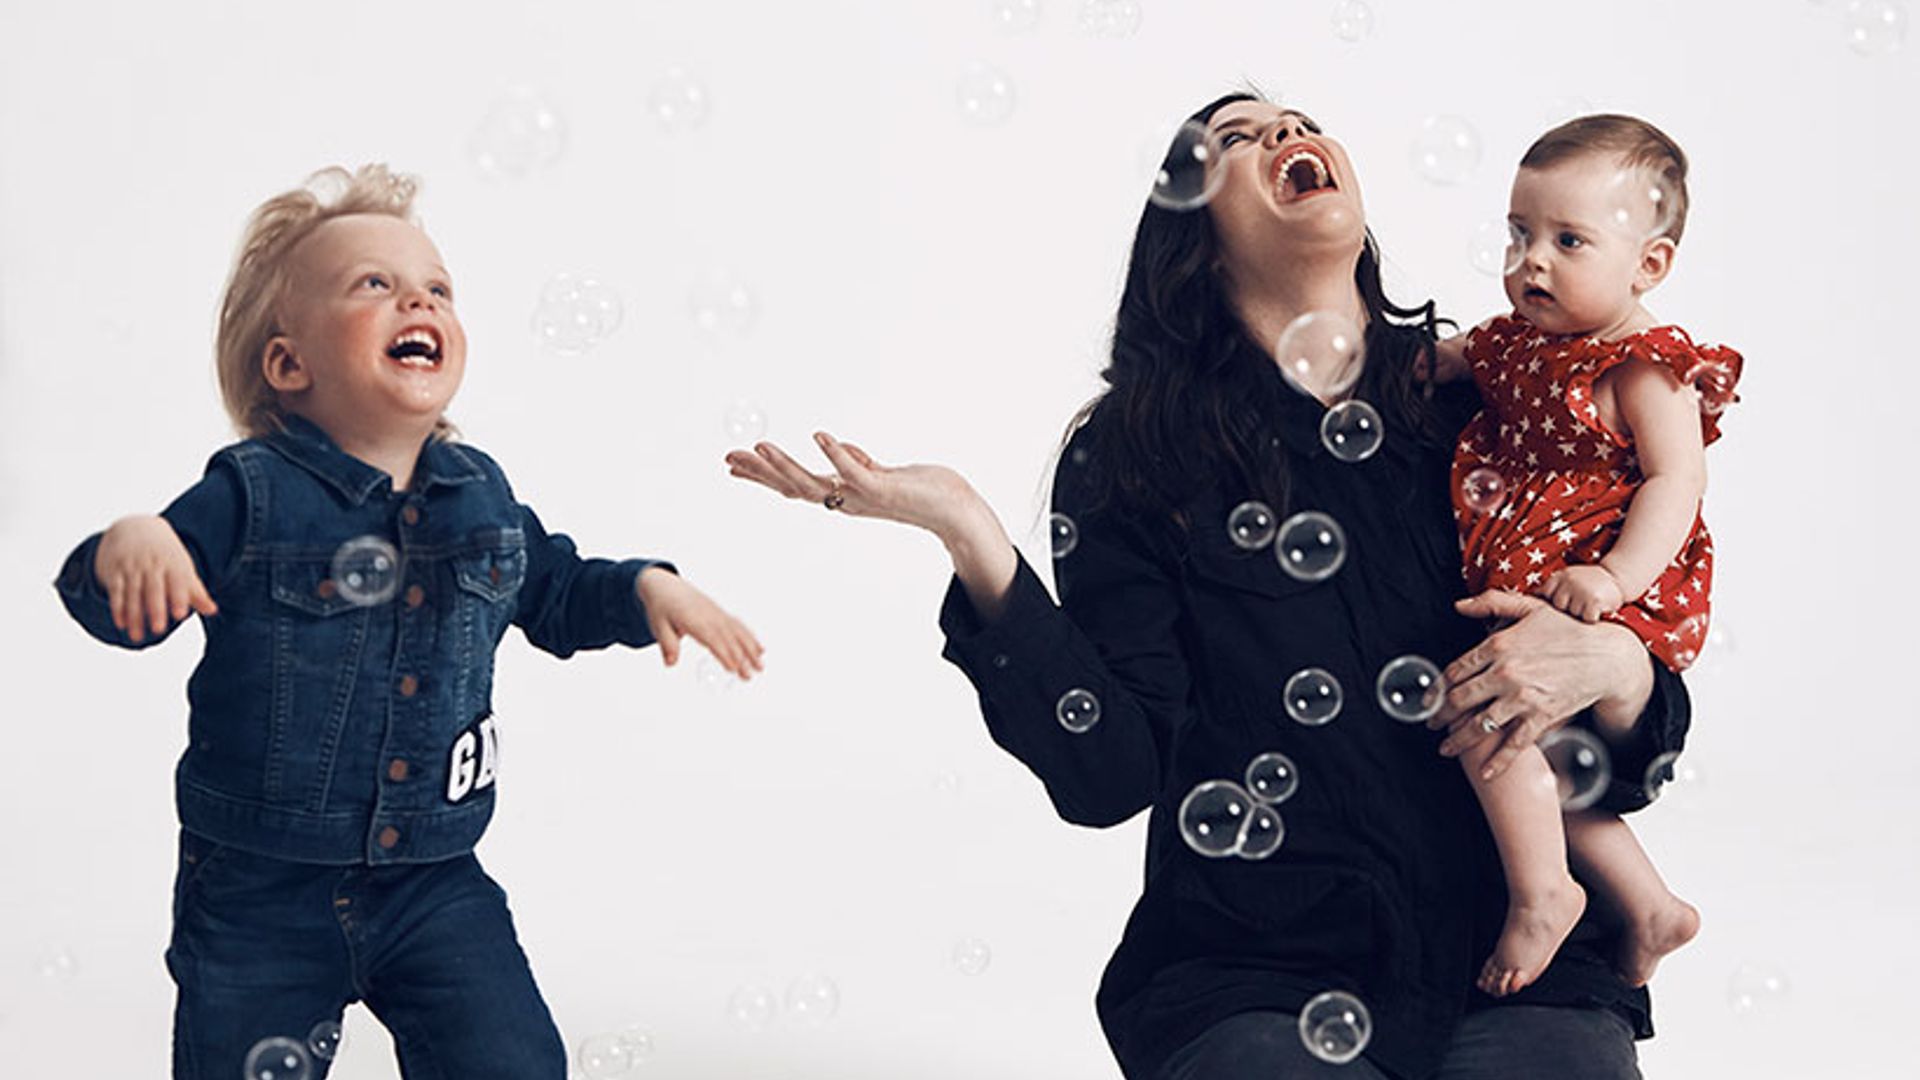 Exclusive: First look at the making of Liv Tyler's new video 'Mama Said' celebrating motherhood